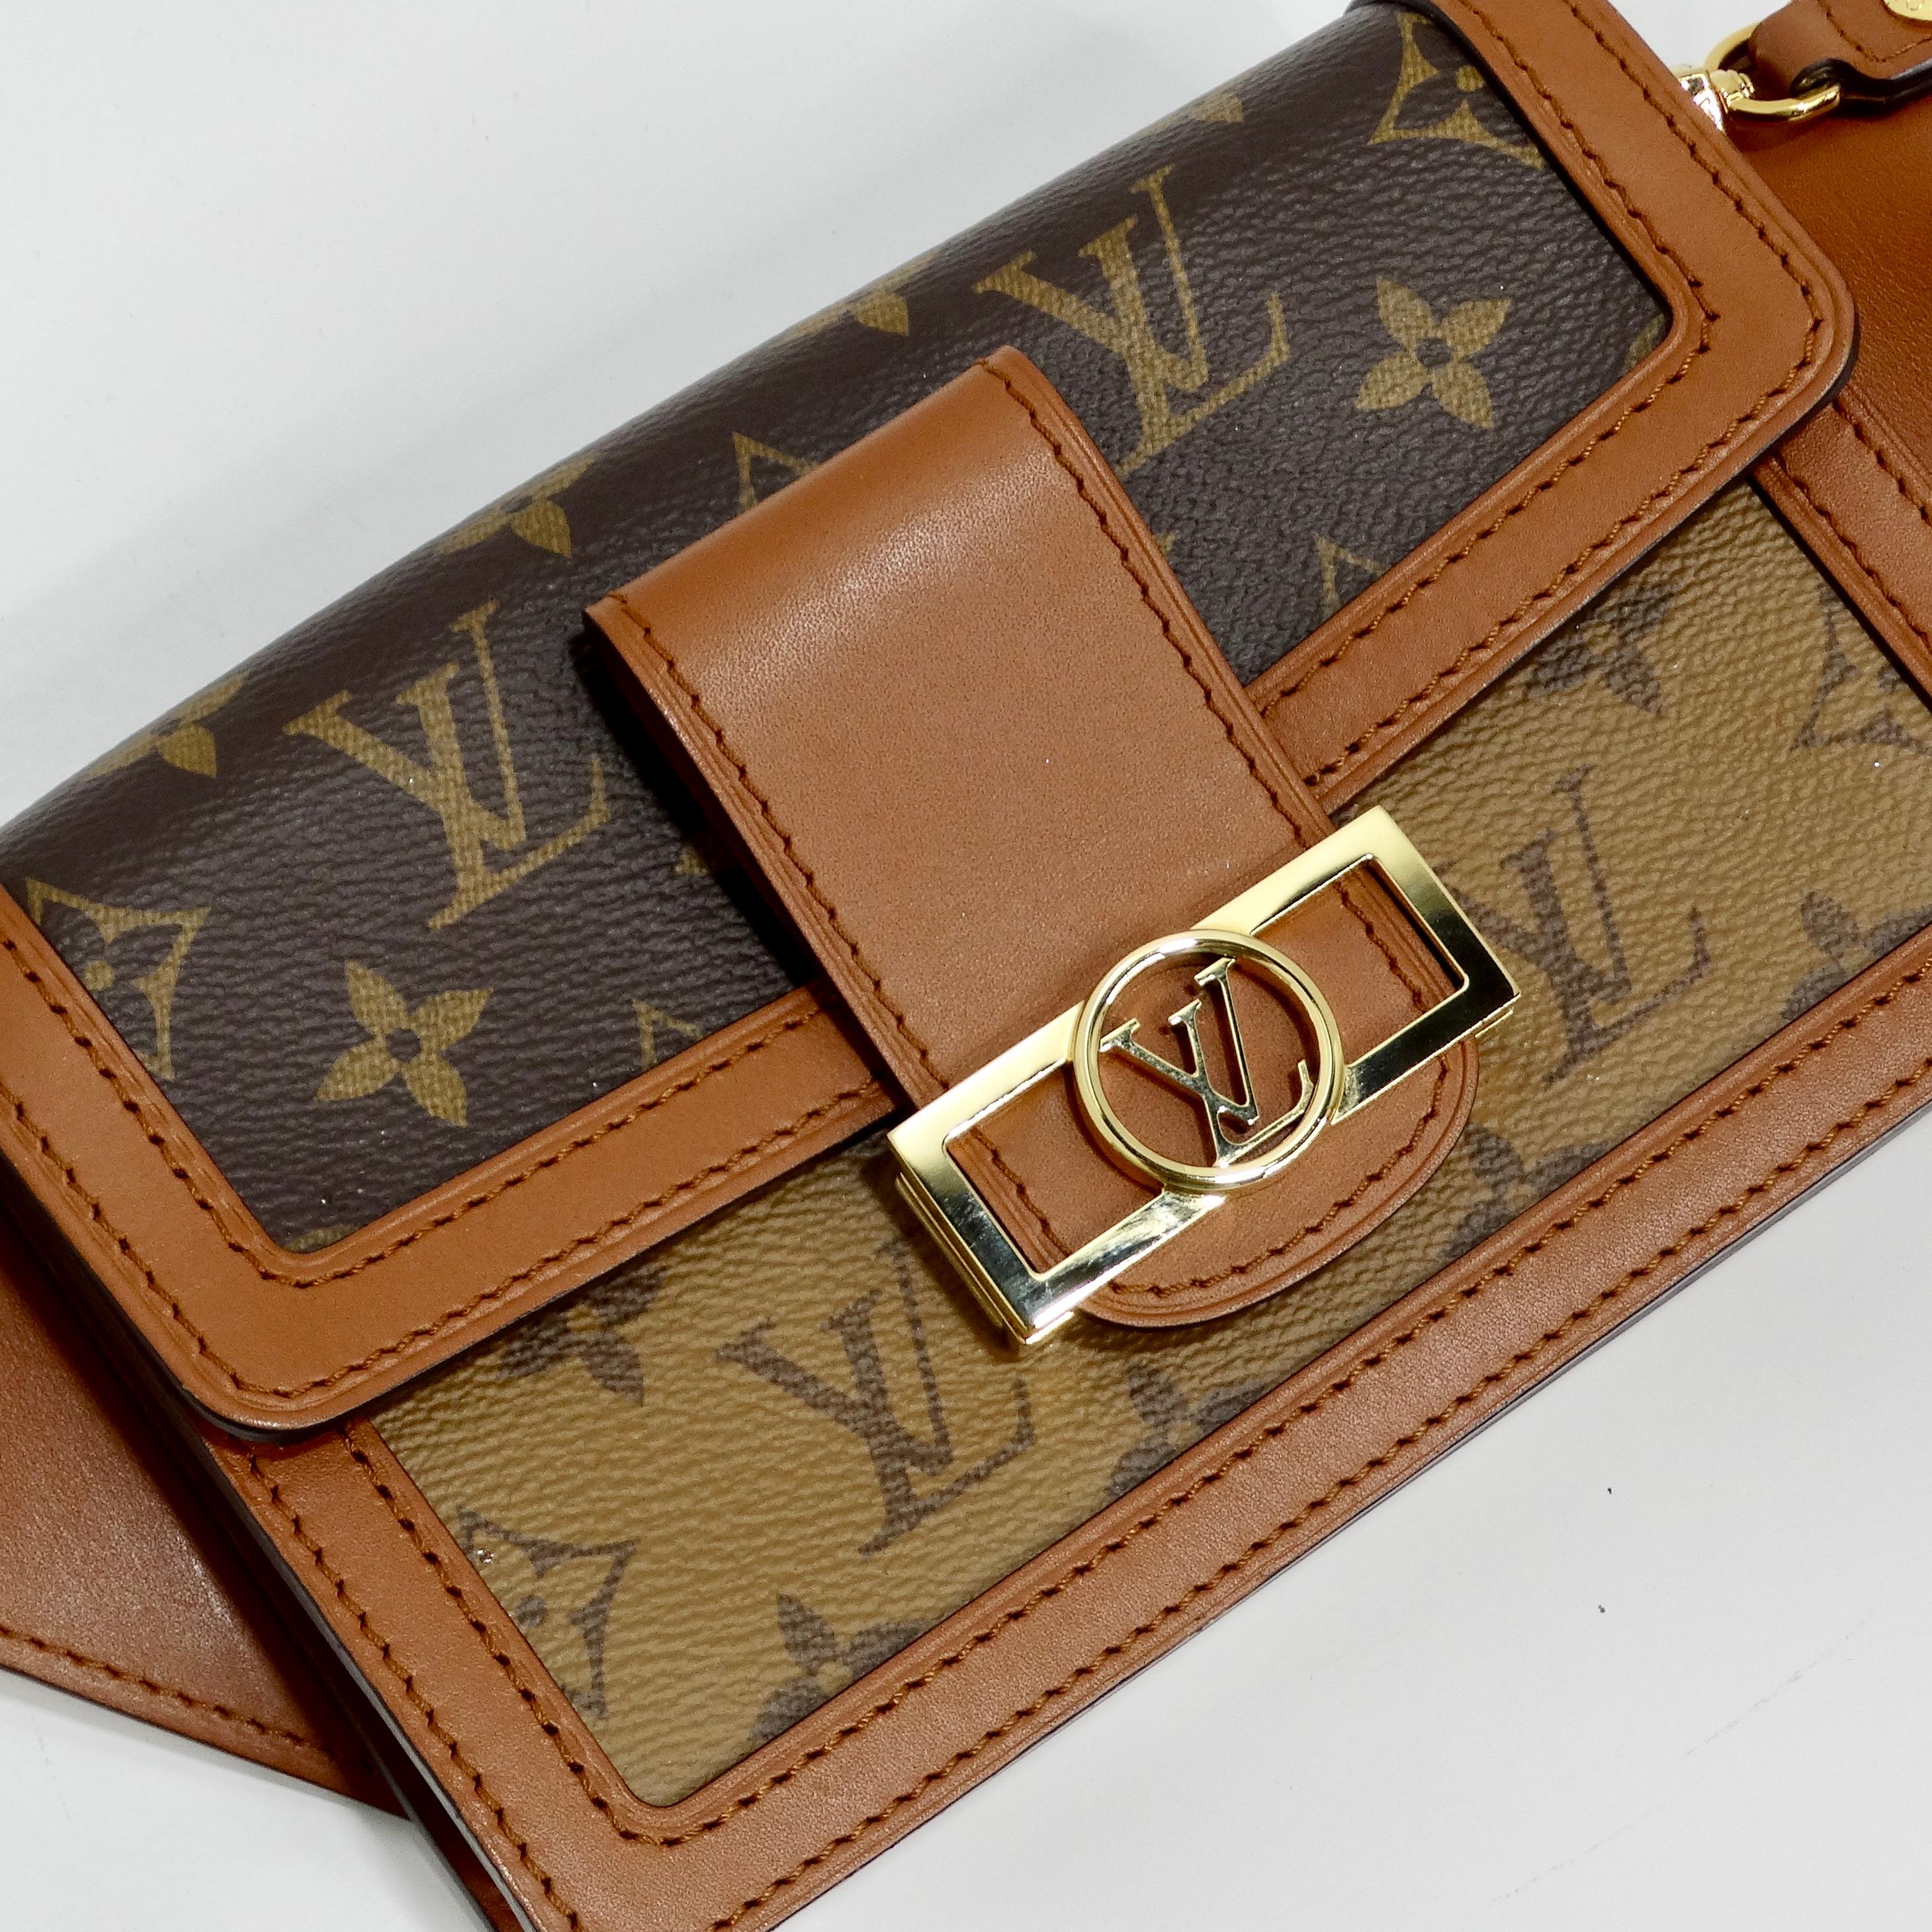 Louis Vuitton Reverse Monogram Dauphine Bumbag In Excellent Condition For Sale In Scottsdale, AZ